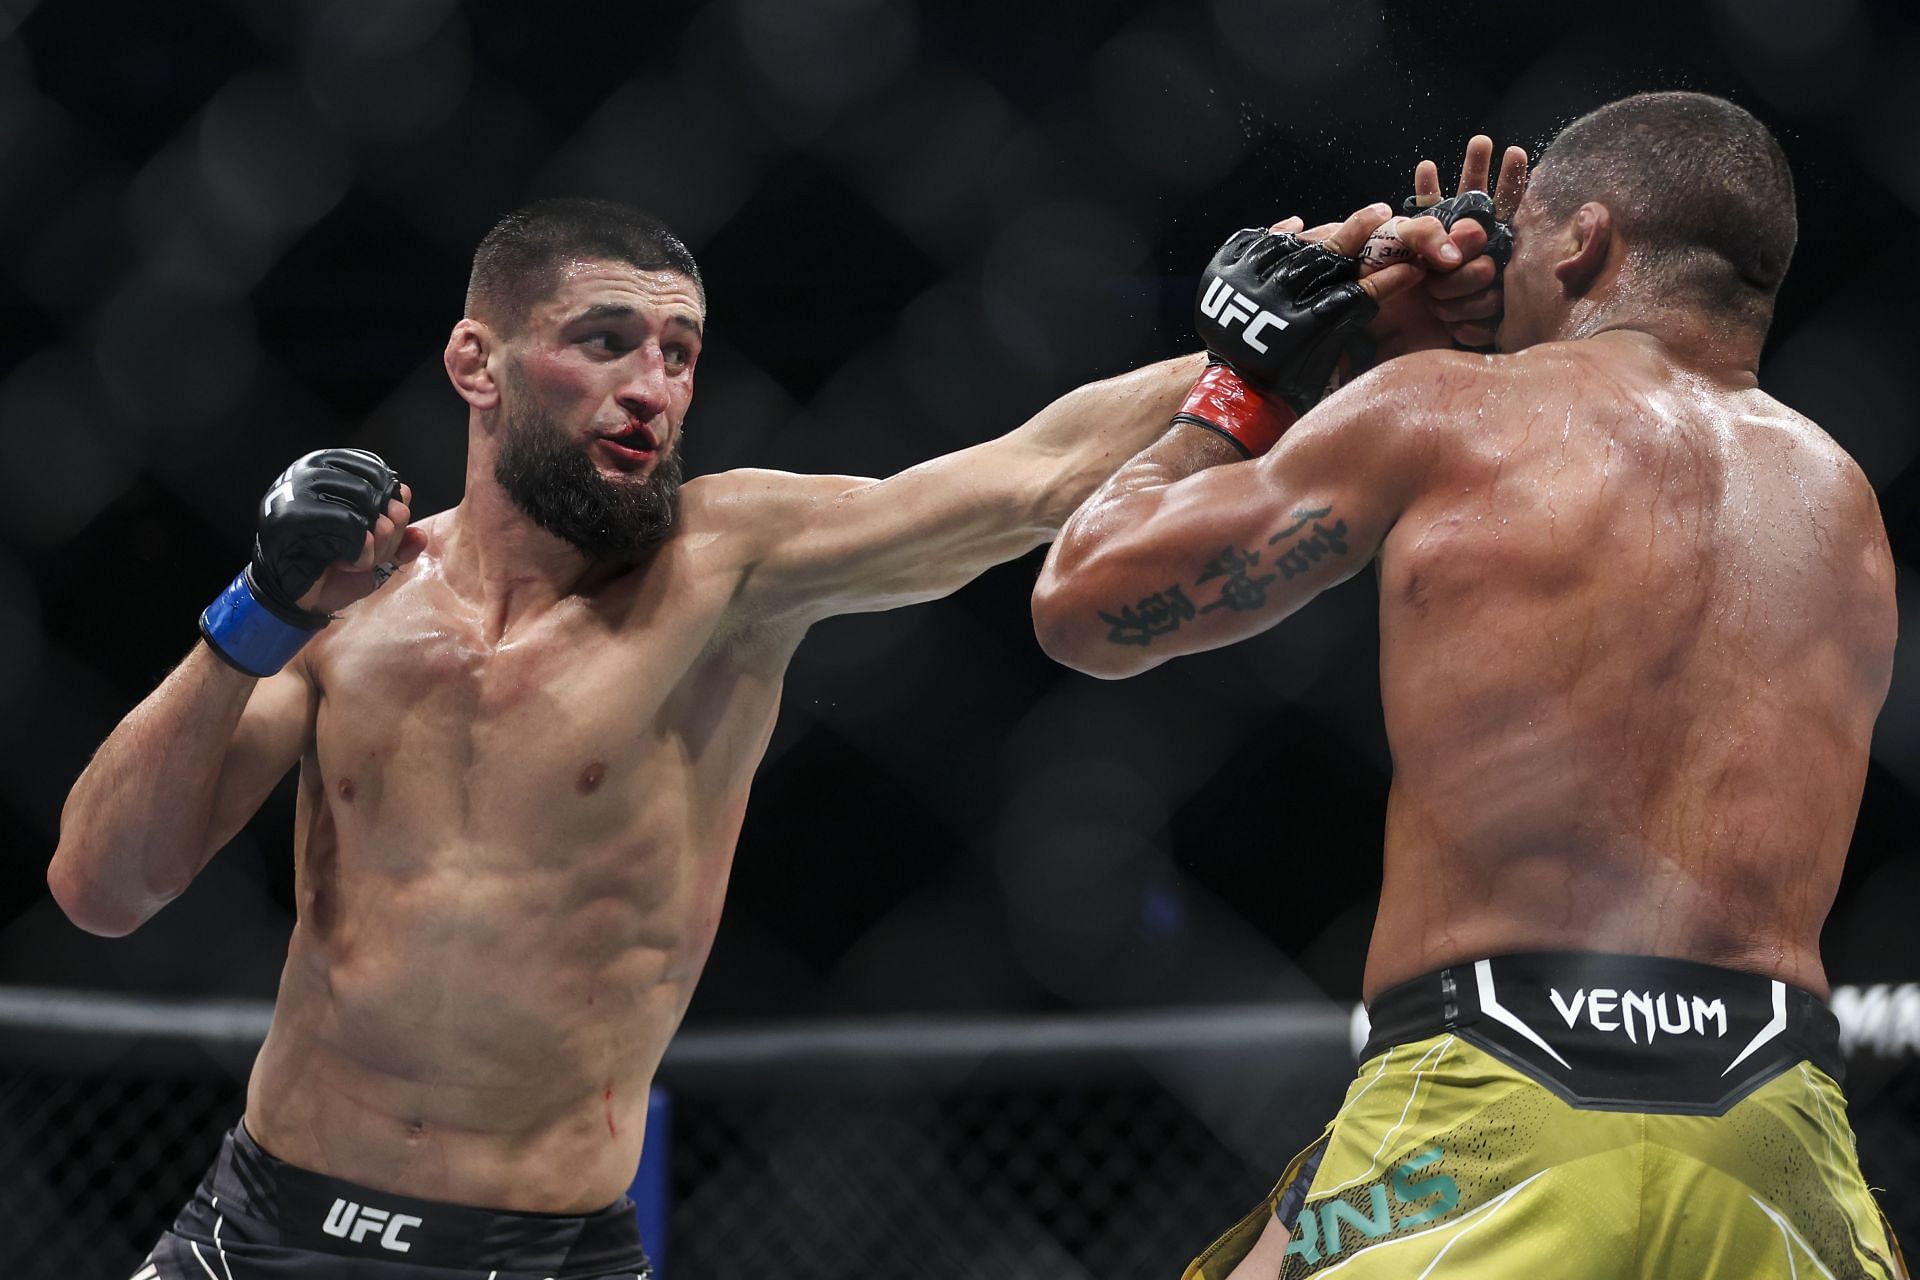 Khamzat Chimaev proved he was for real by defeating Gilbert Burns